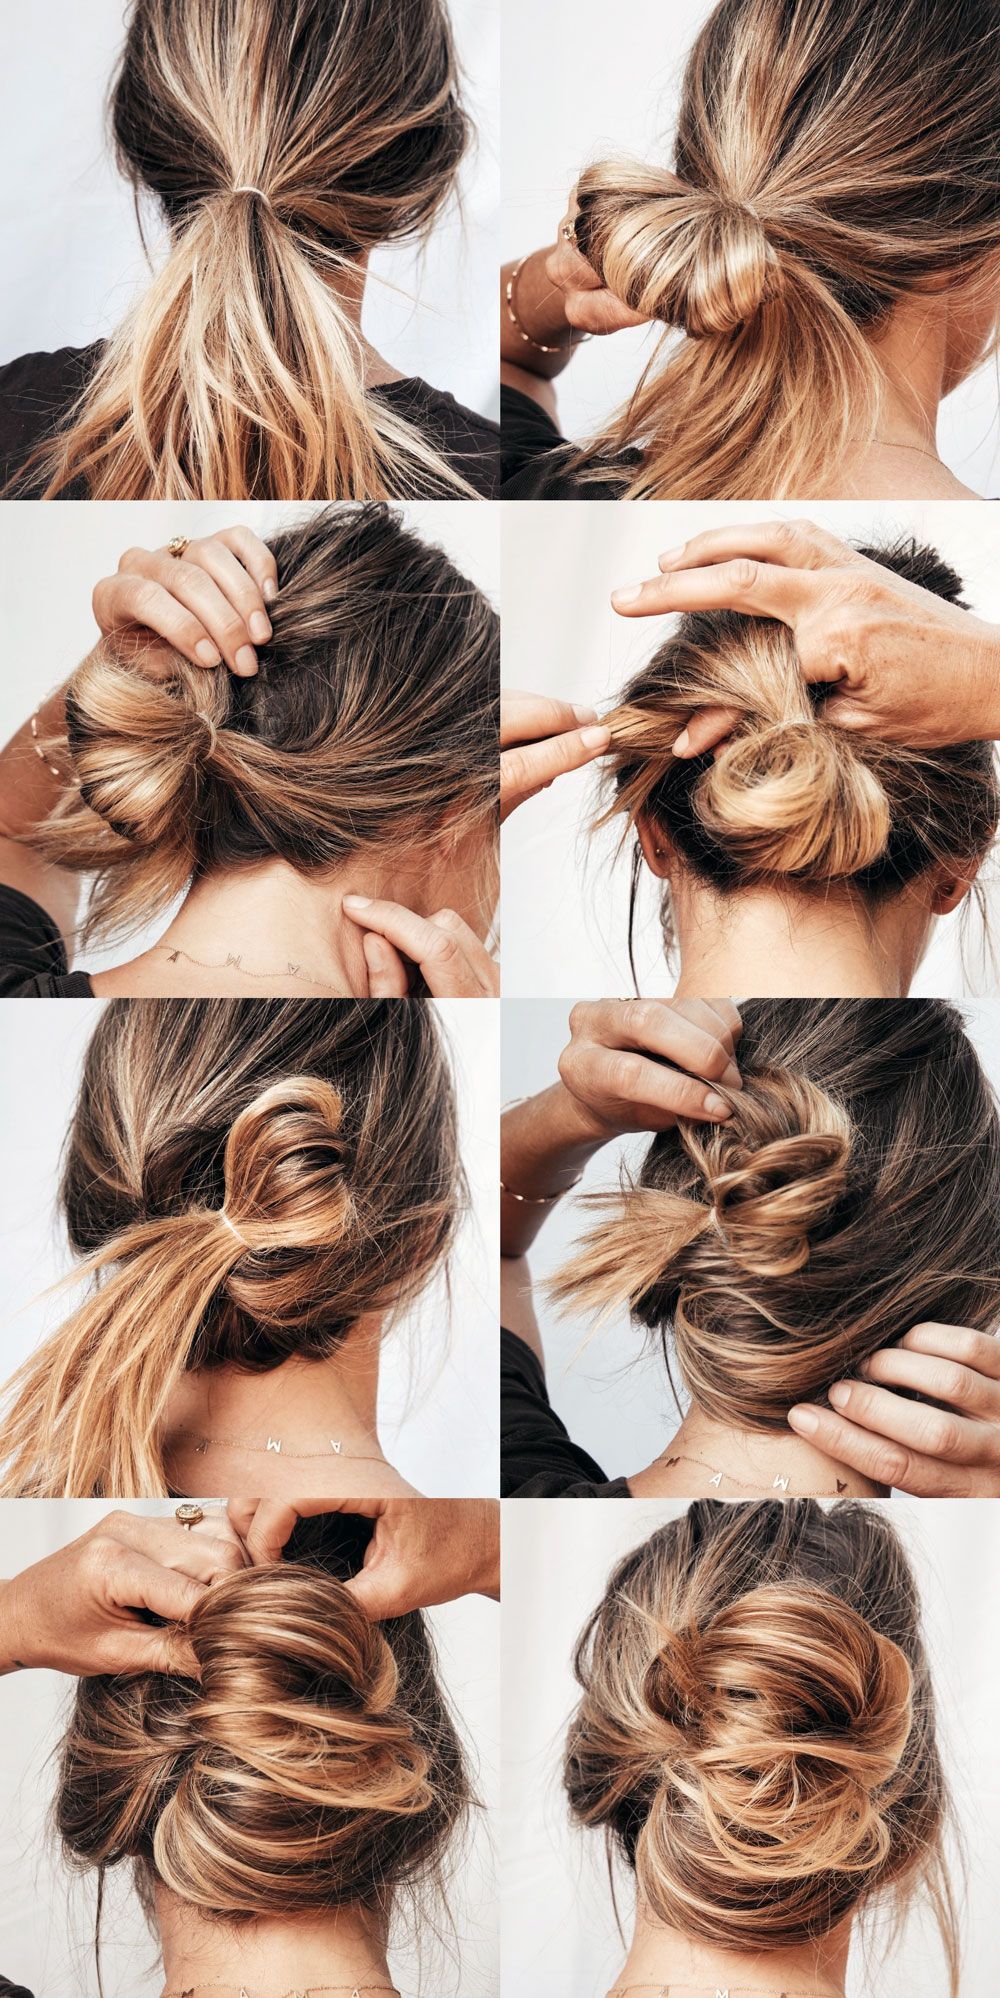 12 hairstyles For Work hot haircuts ideas